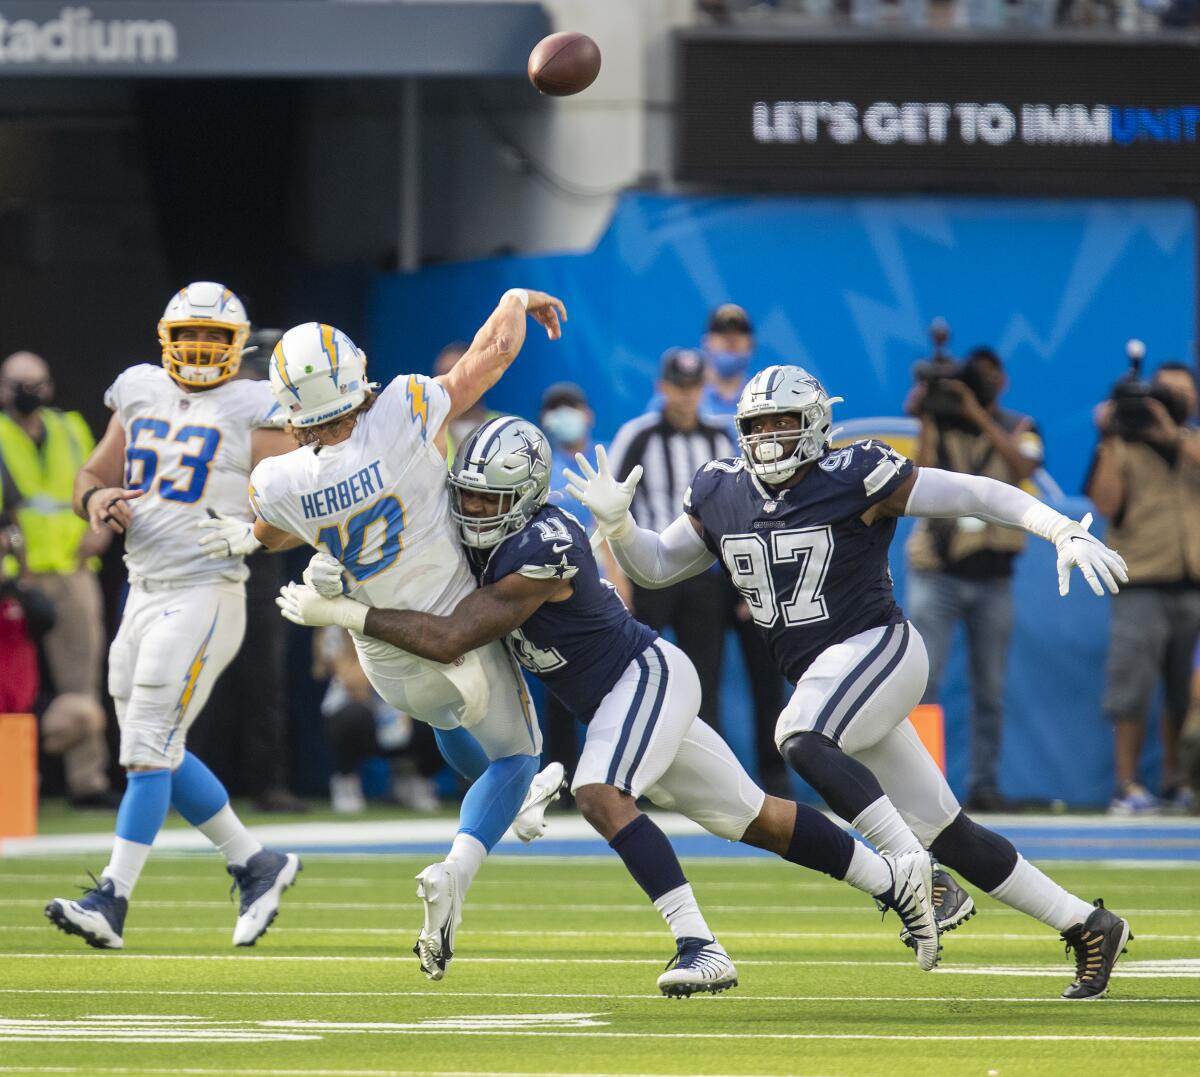 Chargers quarterback Justin Herbert throws to avoid being sacked by Dallas Cowboys linebacker Micah Parsons.